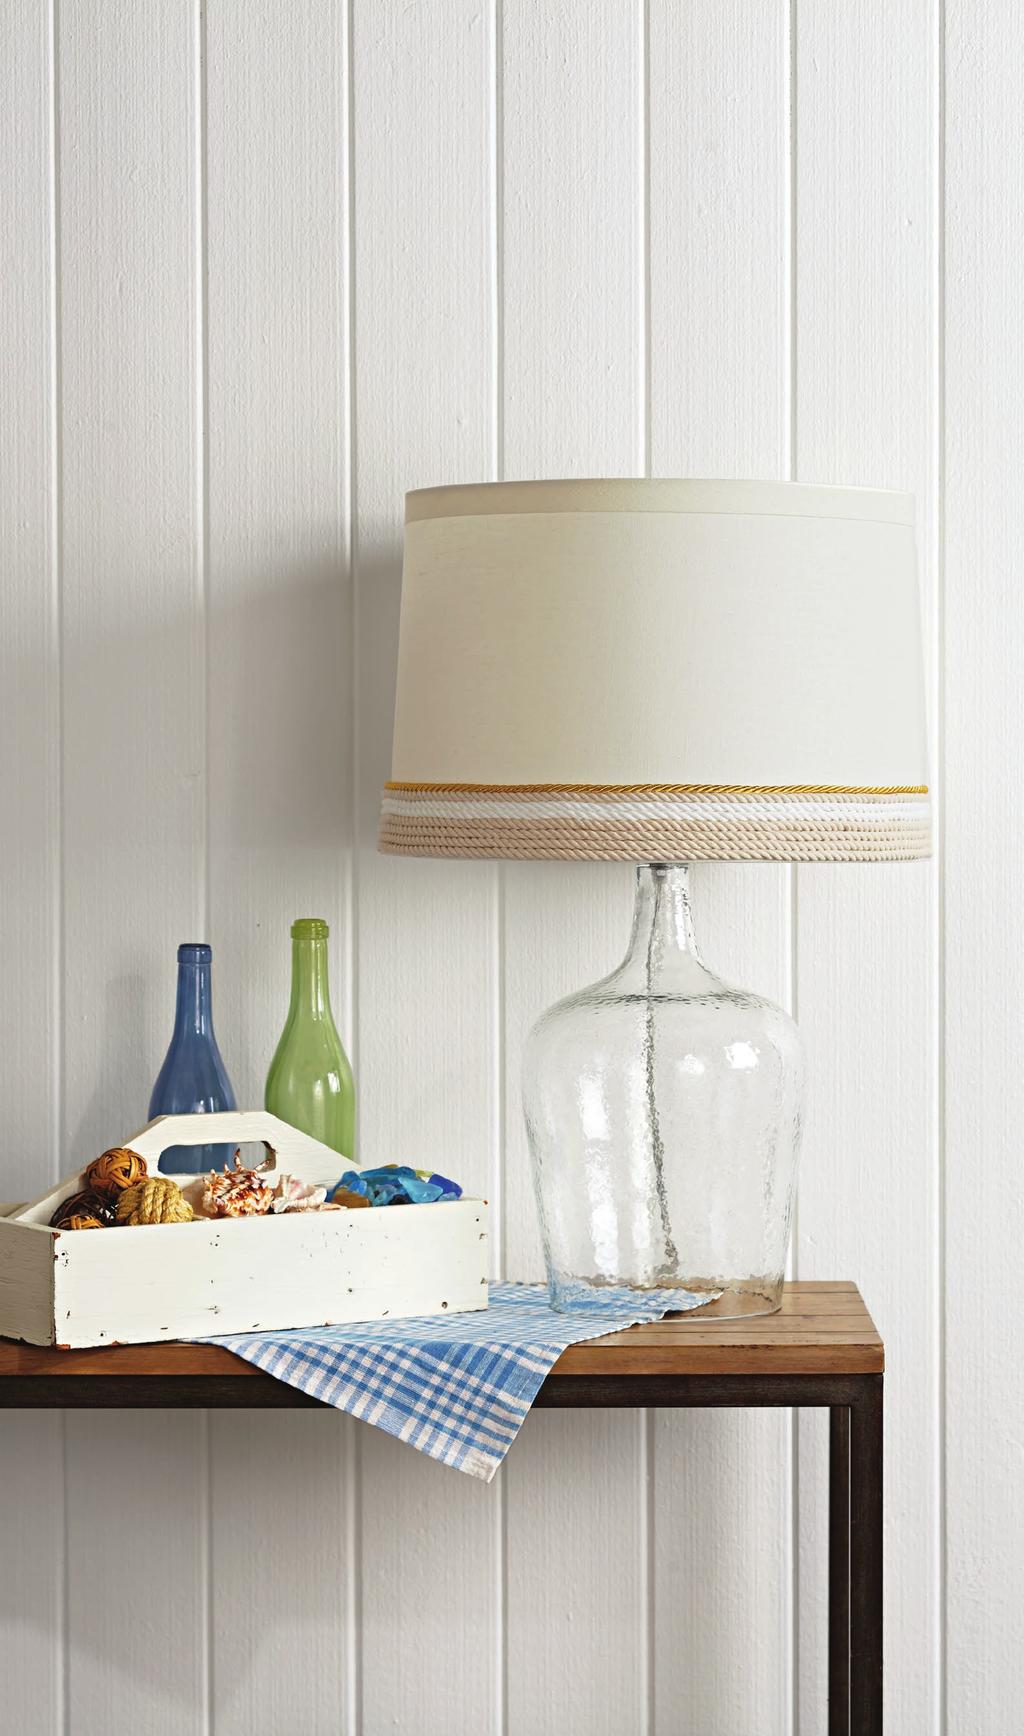 KNOW THE ROPES For a quick makeover with a nod to nautical style, wrap cord around the bottom edge of a plain lampshade.